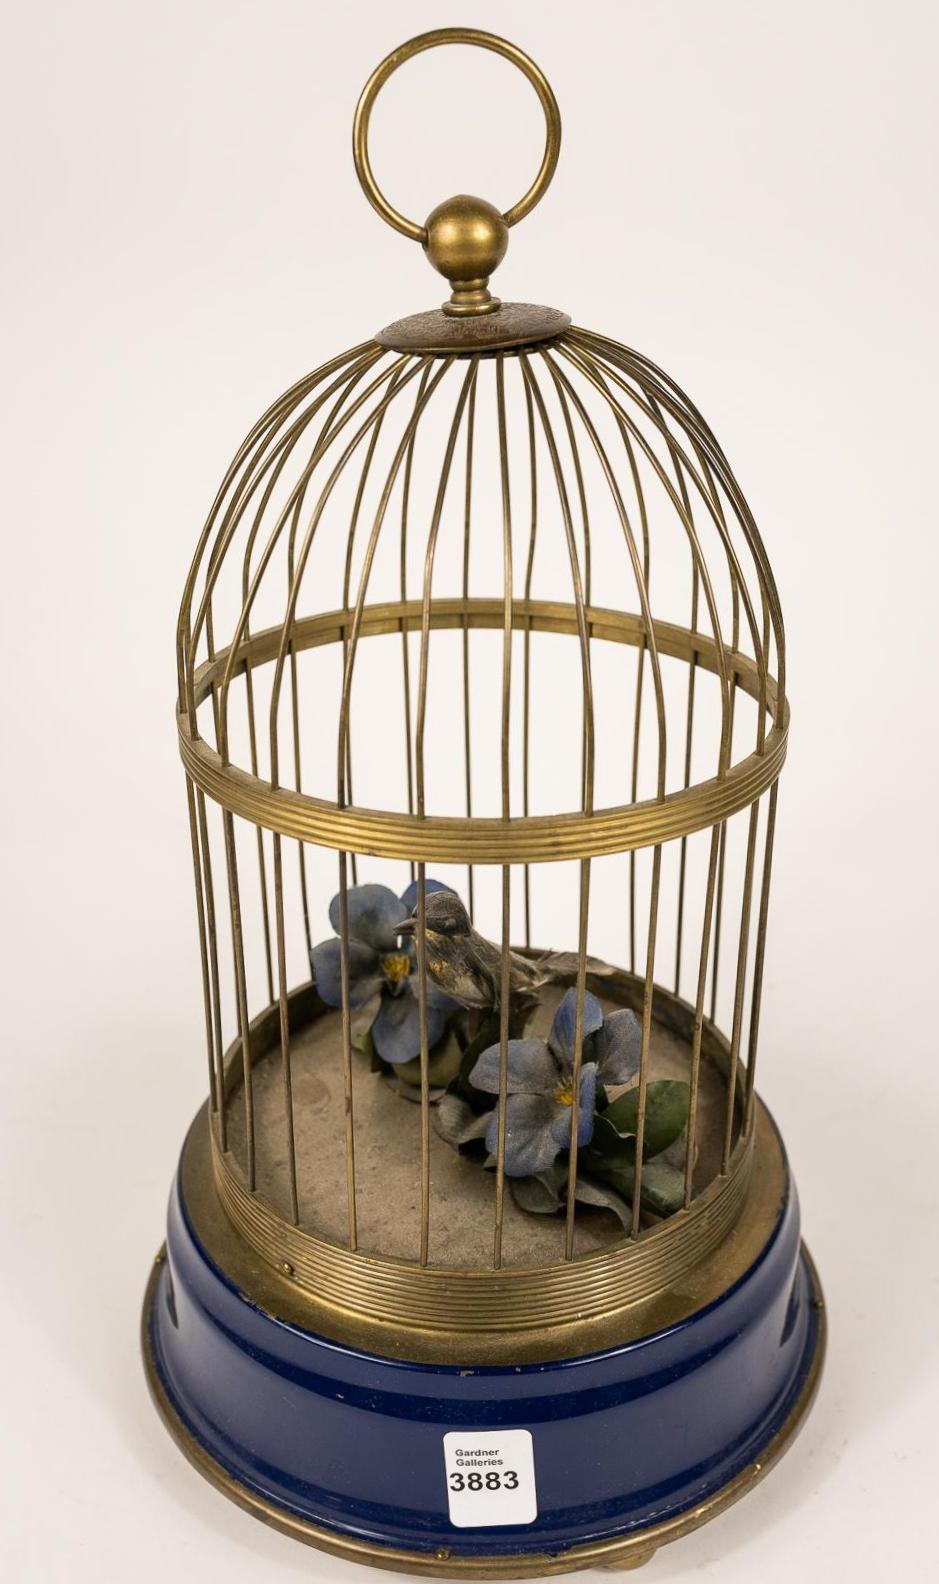 MECHANICAL "BIRD IN CAGE"